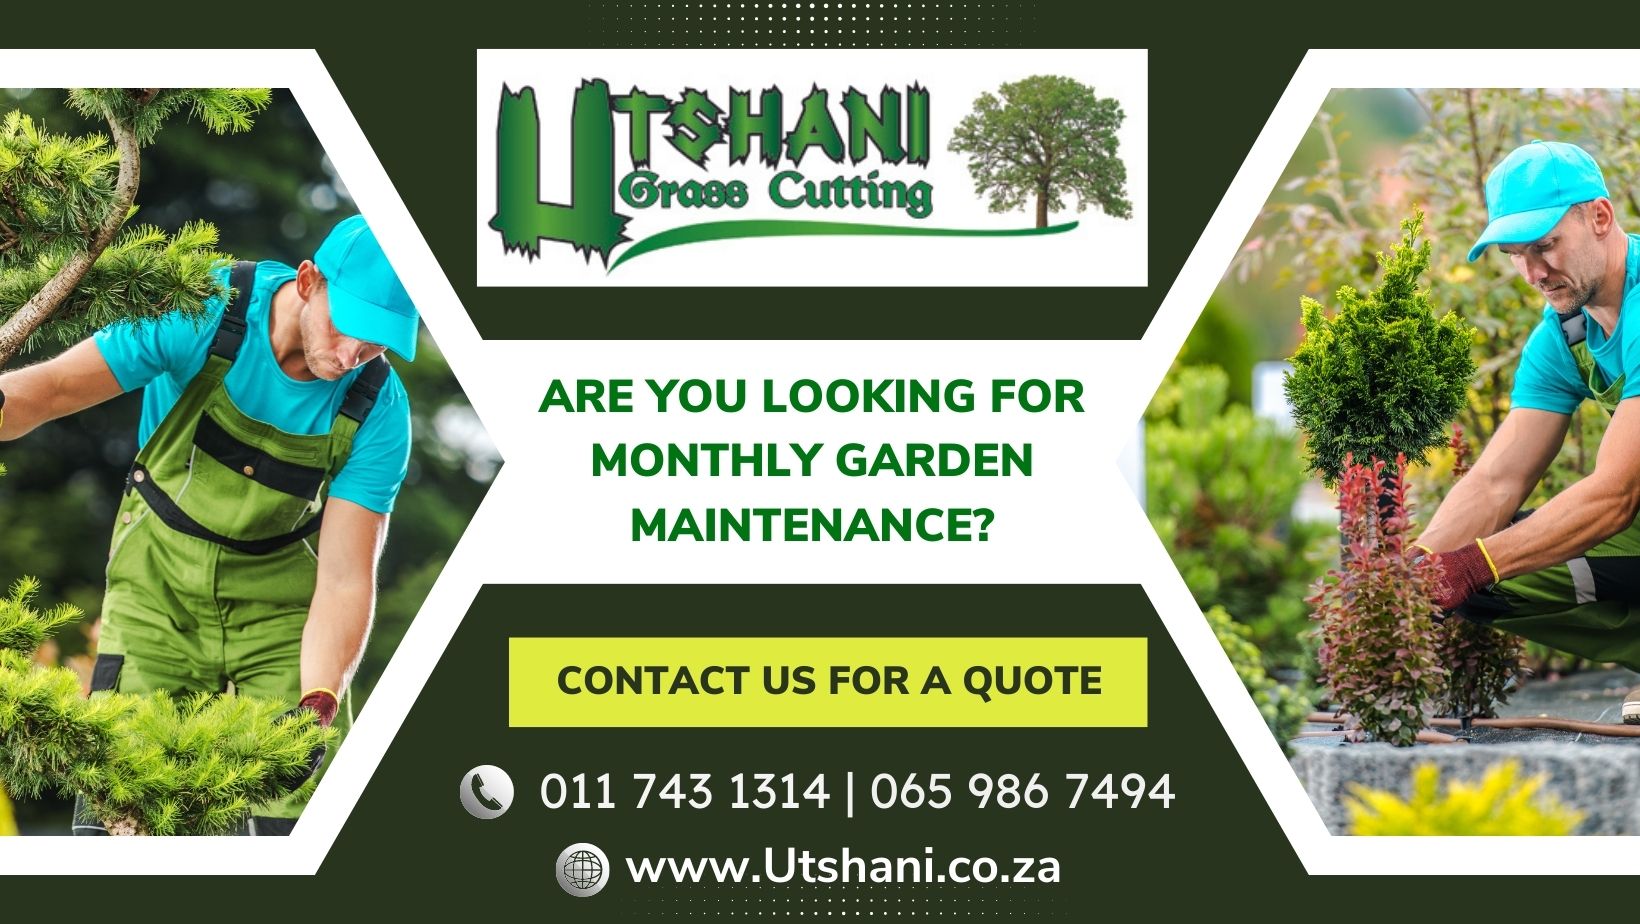 Htshani Grass Cutting _Are you looking for Monthly garden maintenance